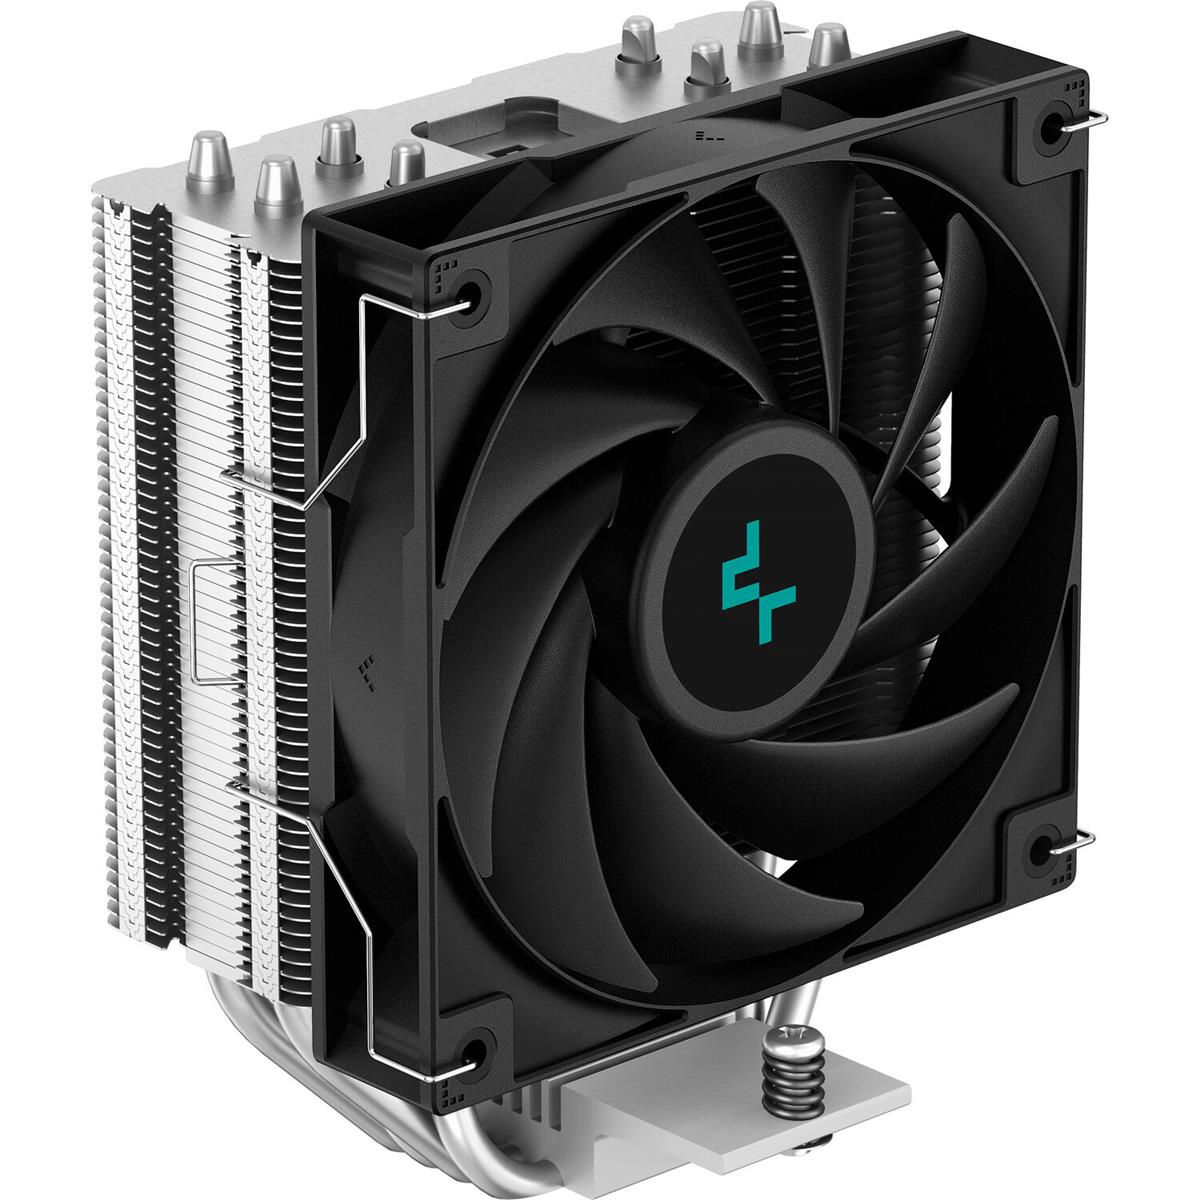 Image of DeepCool AG400 120mm Single-Tower CPU Cooler